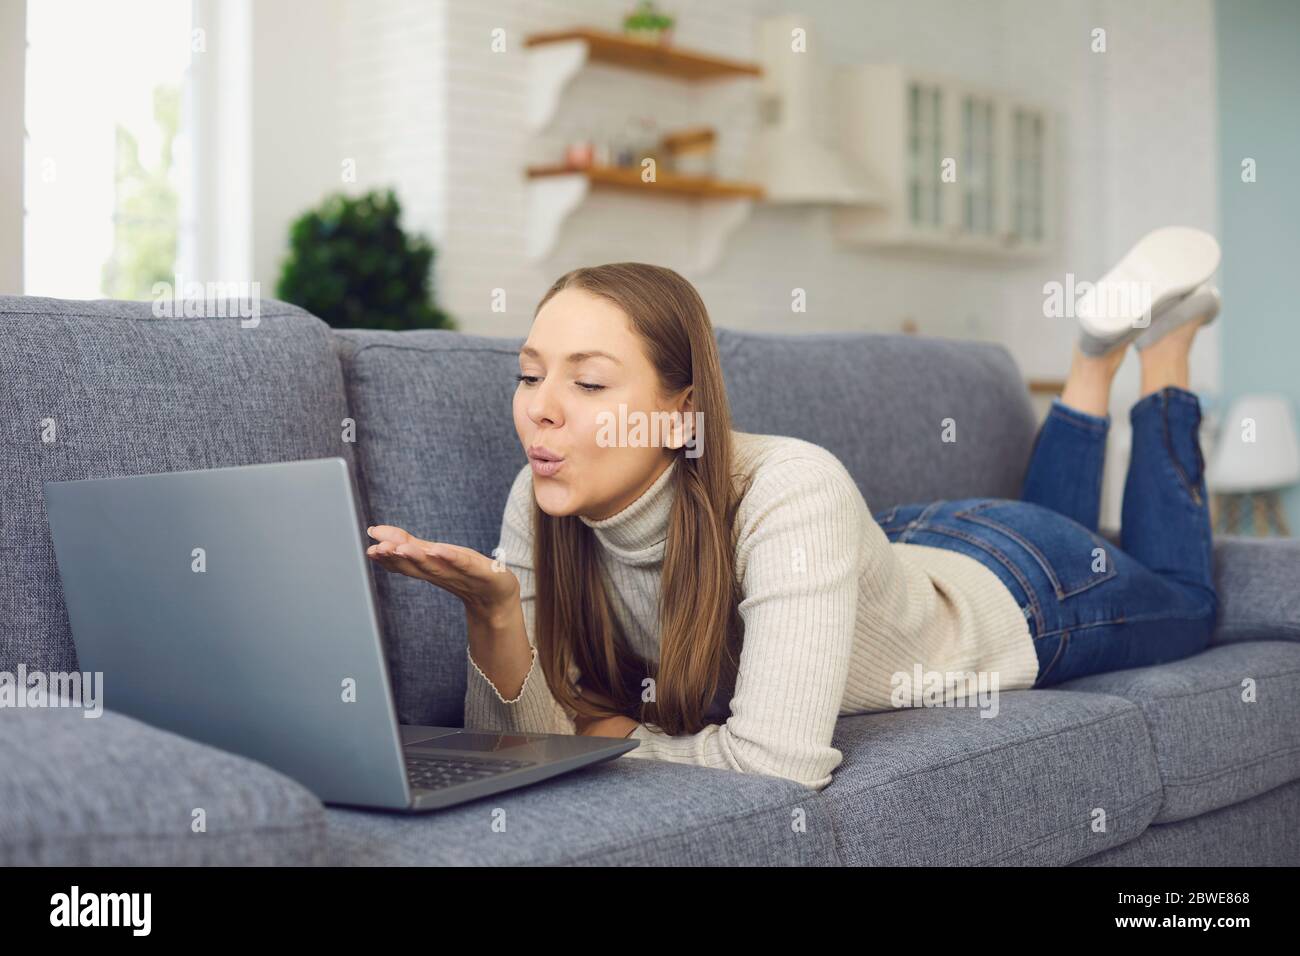 Dating online. Woman sending air kiss and using laptop in living chat room. Stock Photo